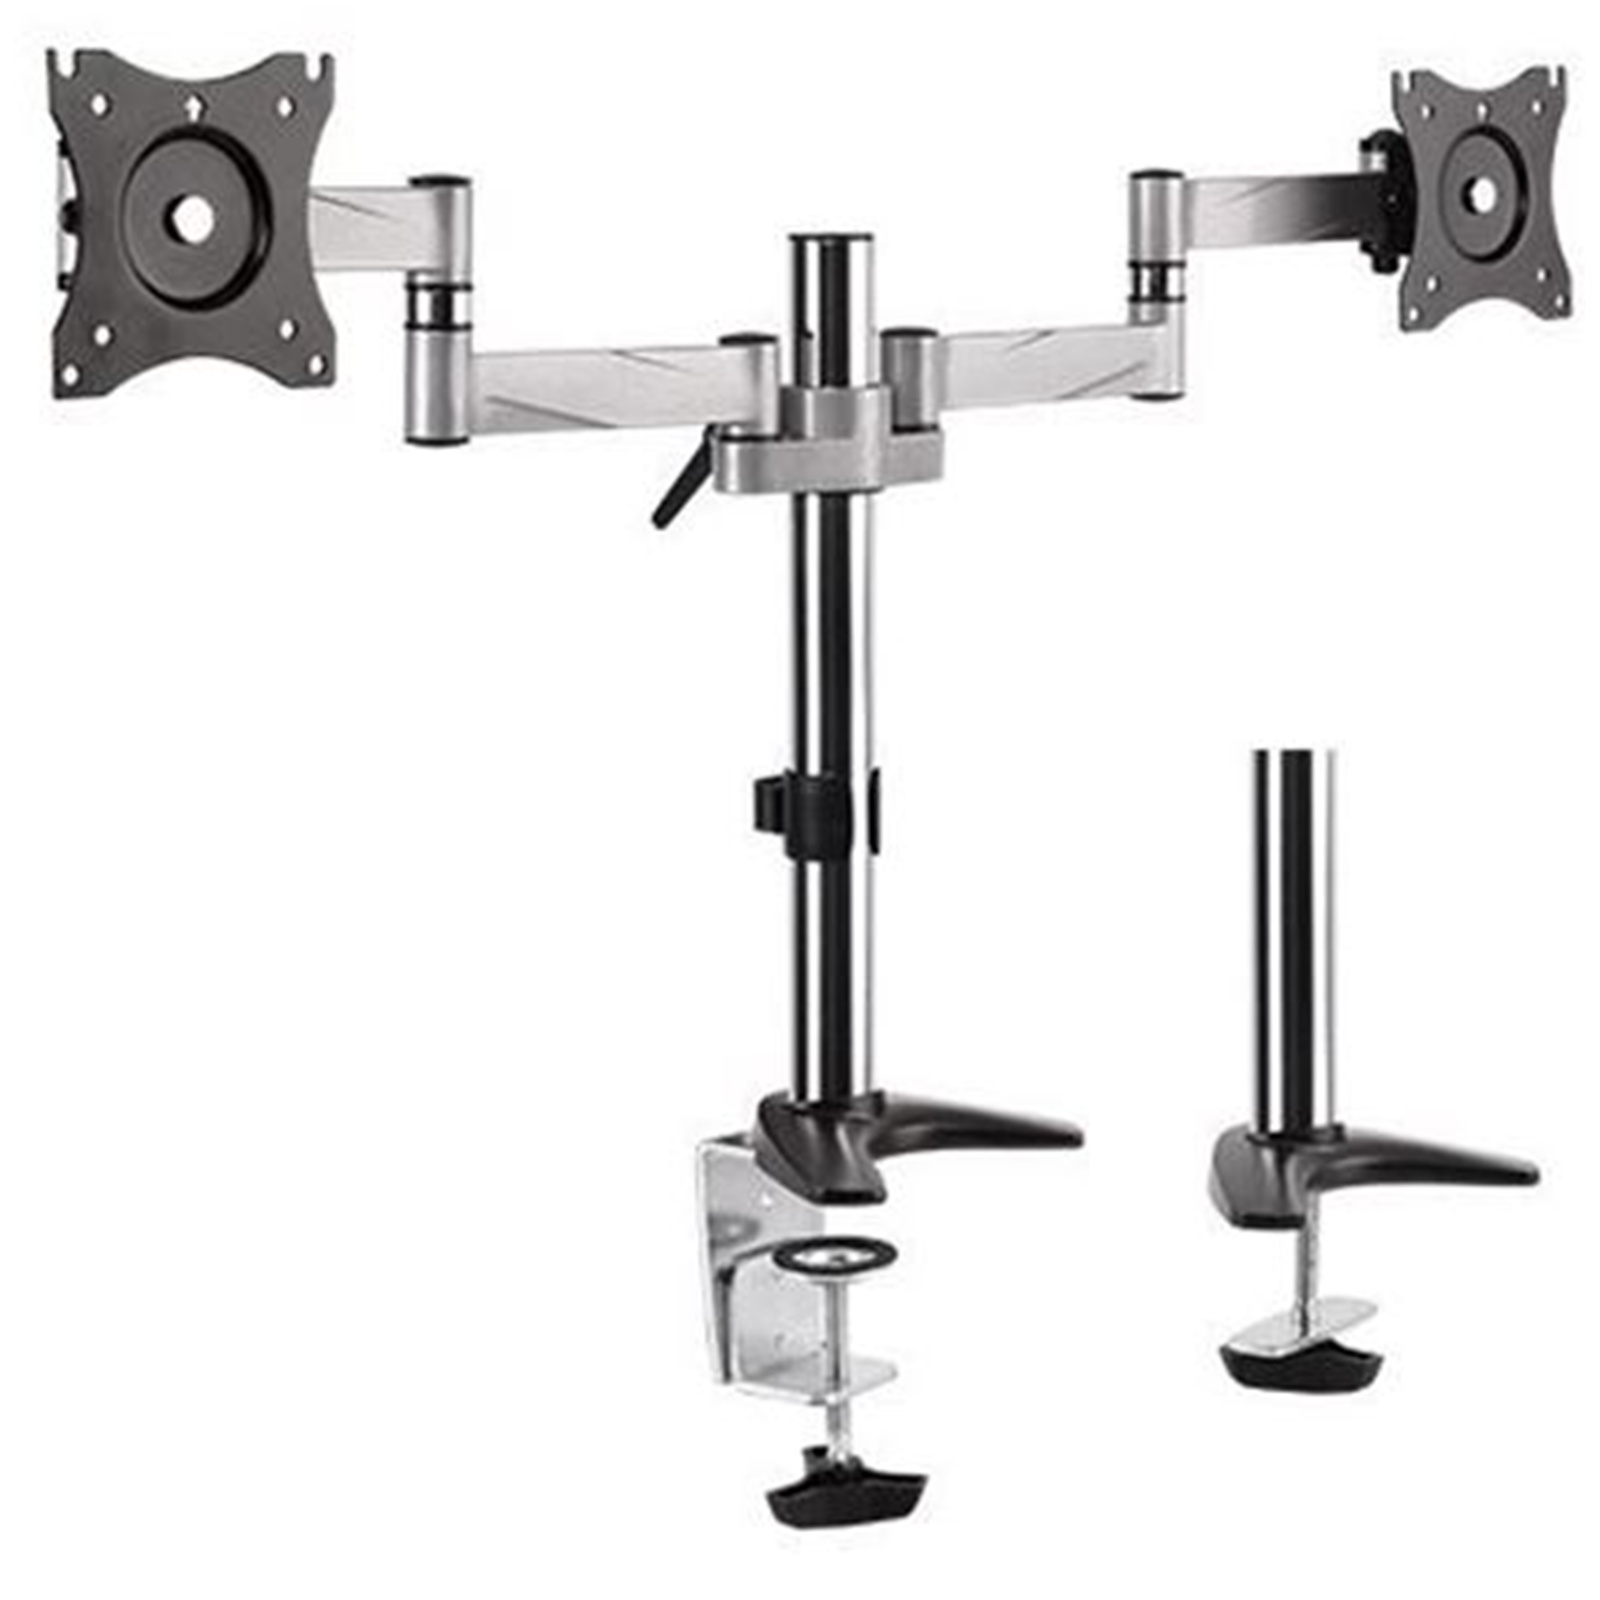 Buy the Brateck LDT11-C024 13''-27'' Dual monitor desk mount. Max